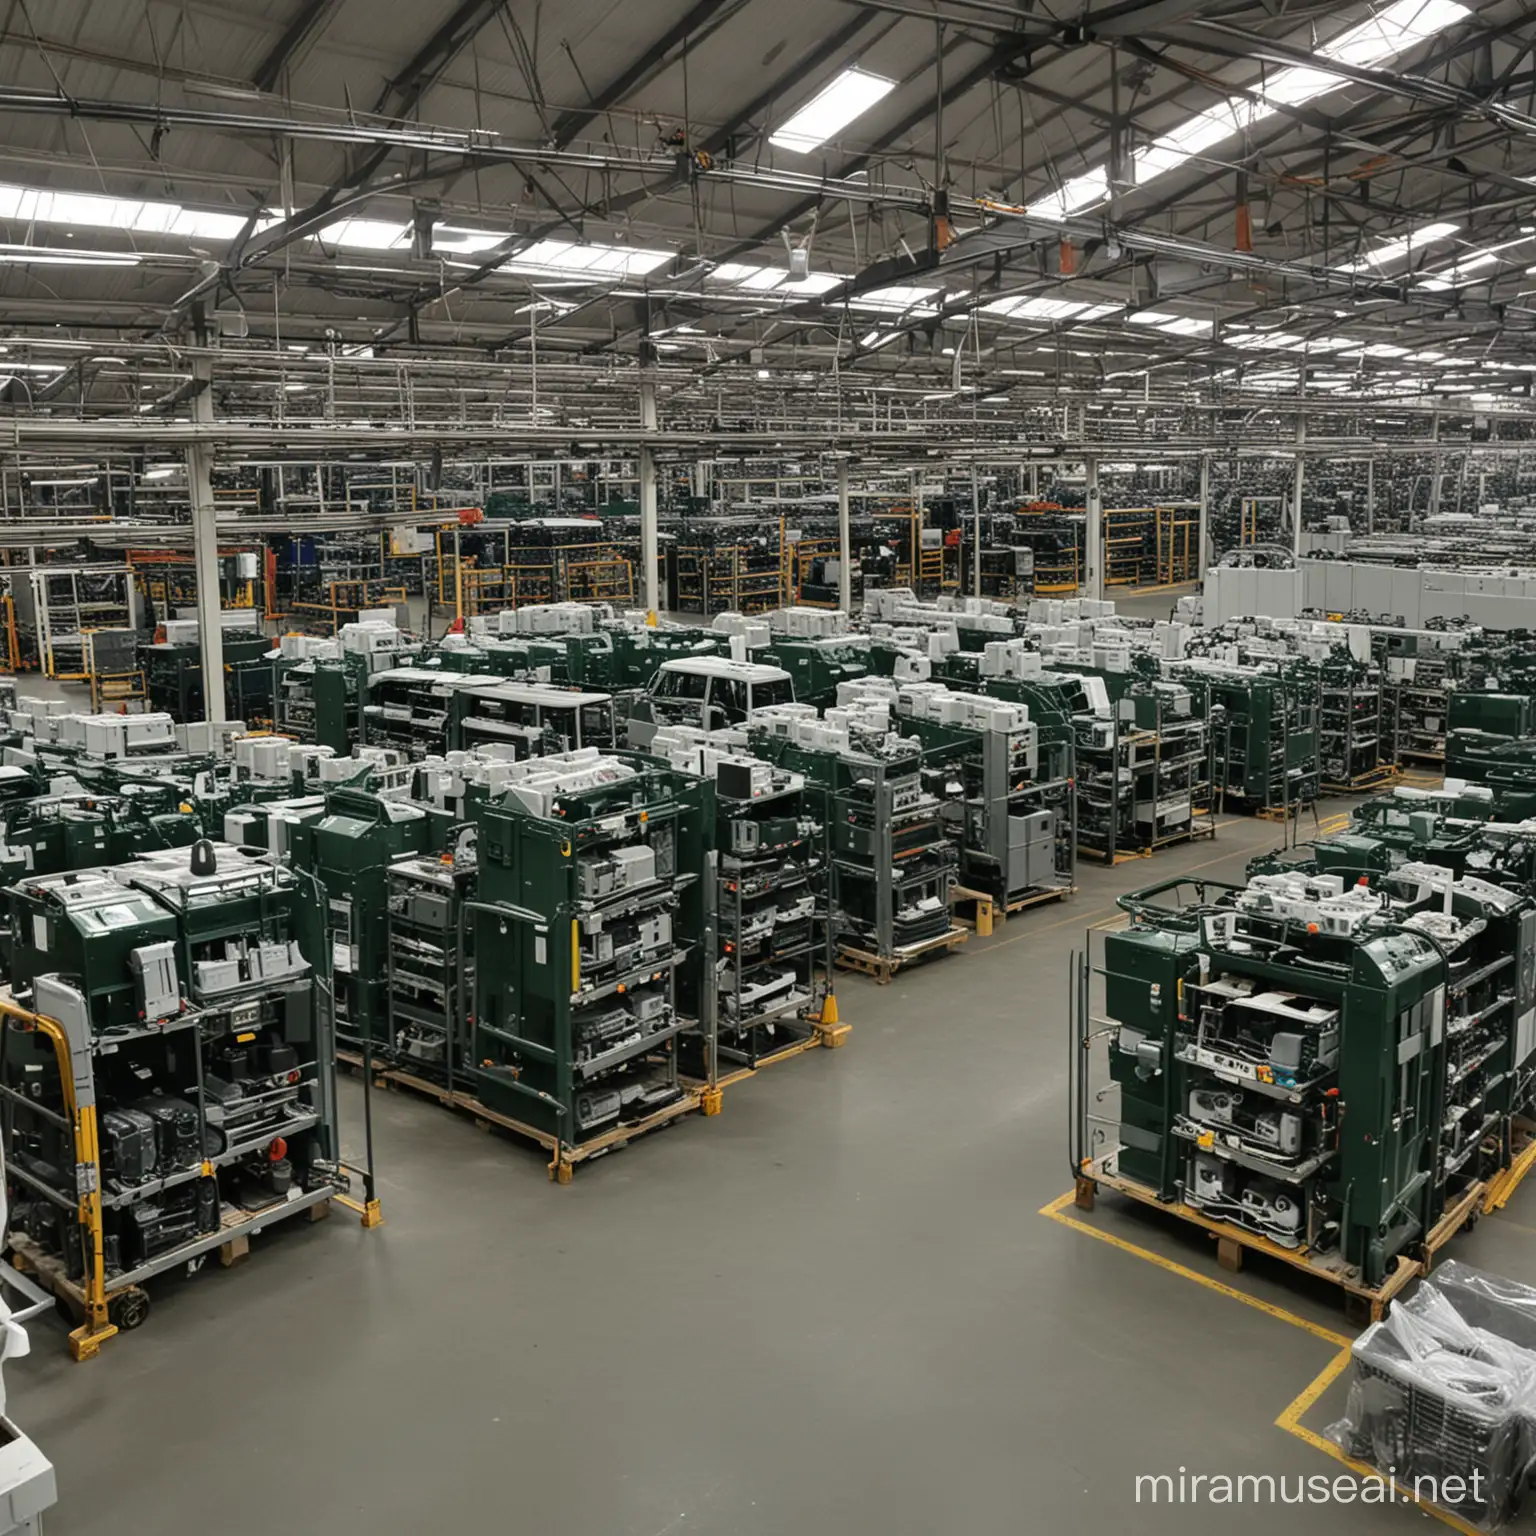 Factory manufacturing spare parts for Land Rover vehicles